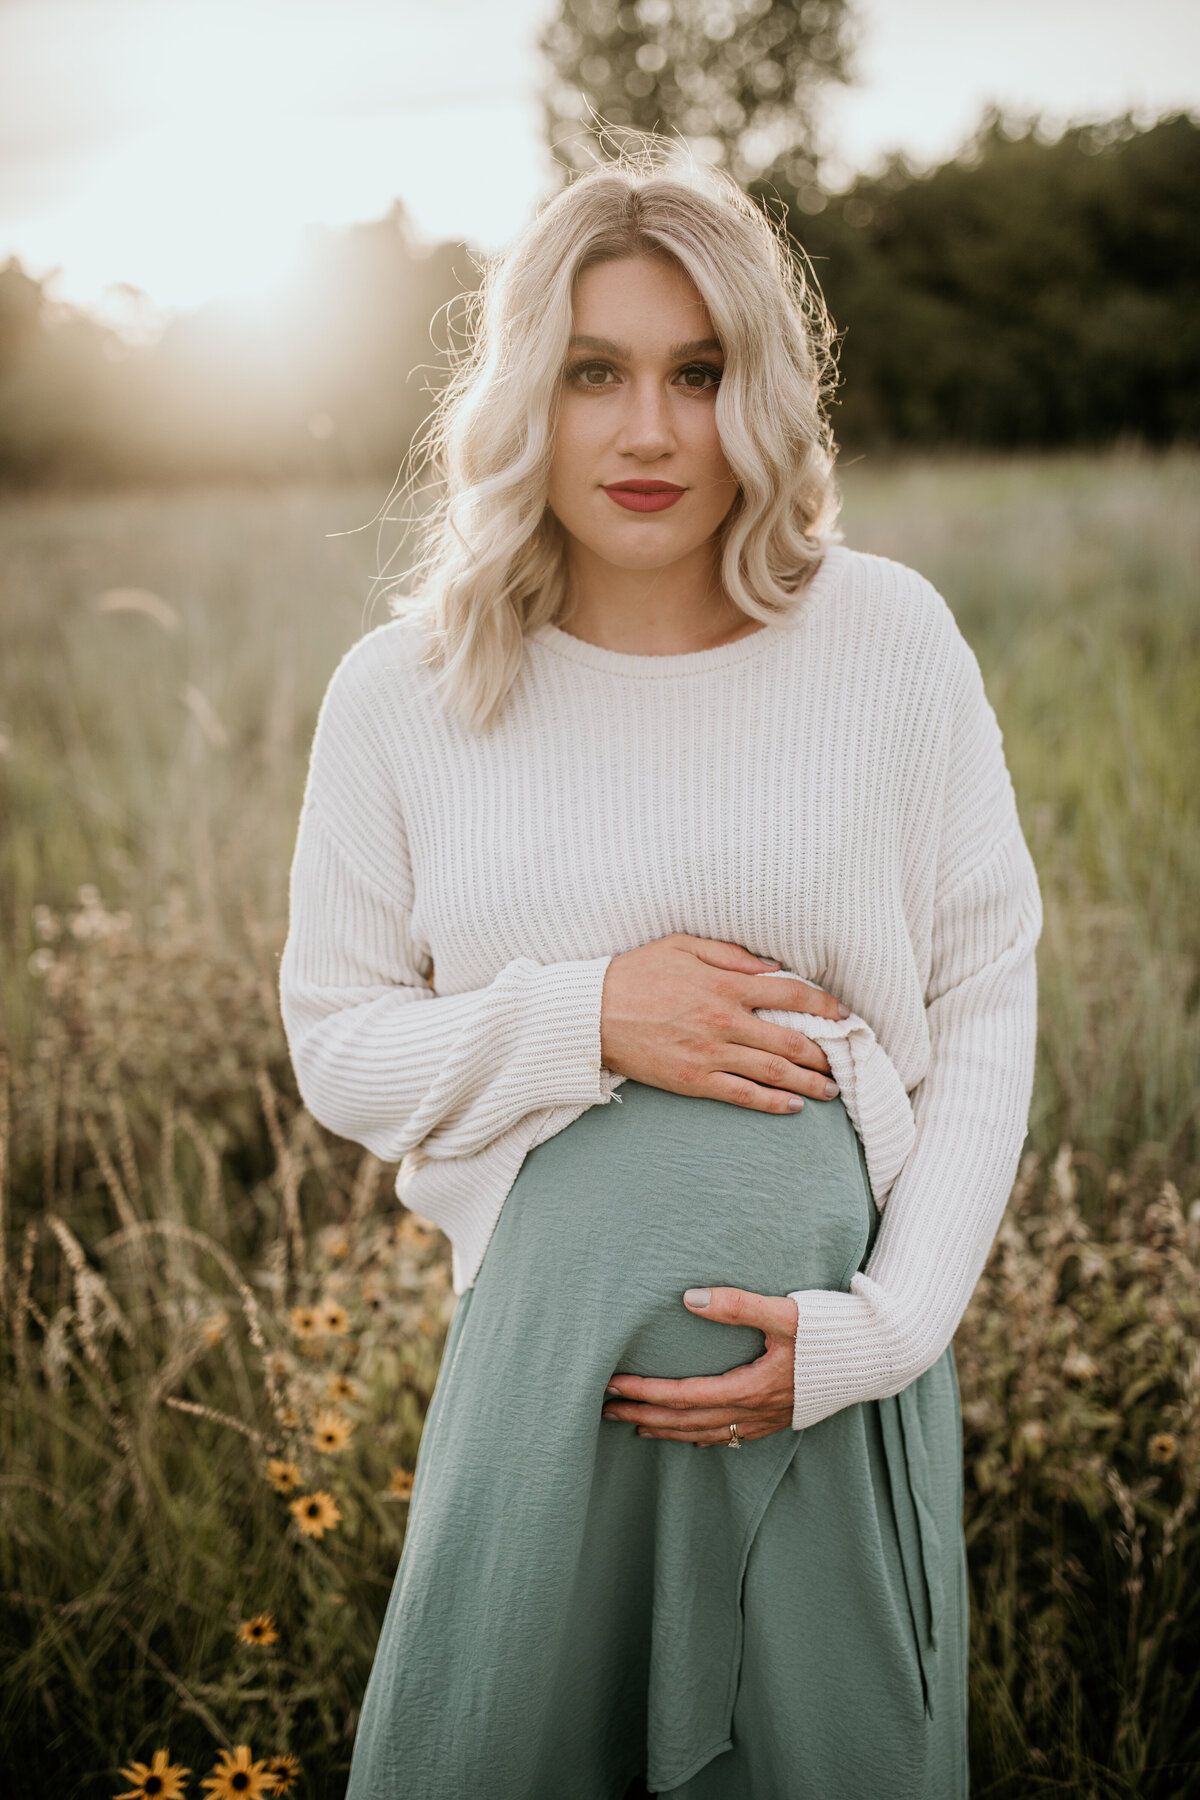 Maternity session in Sioux Falls, South Dakota.